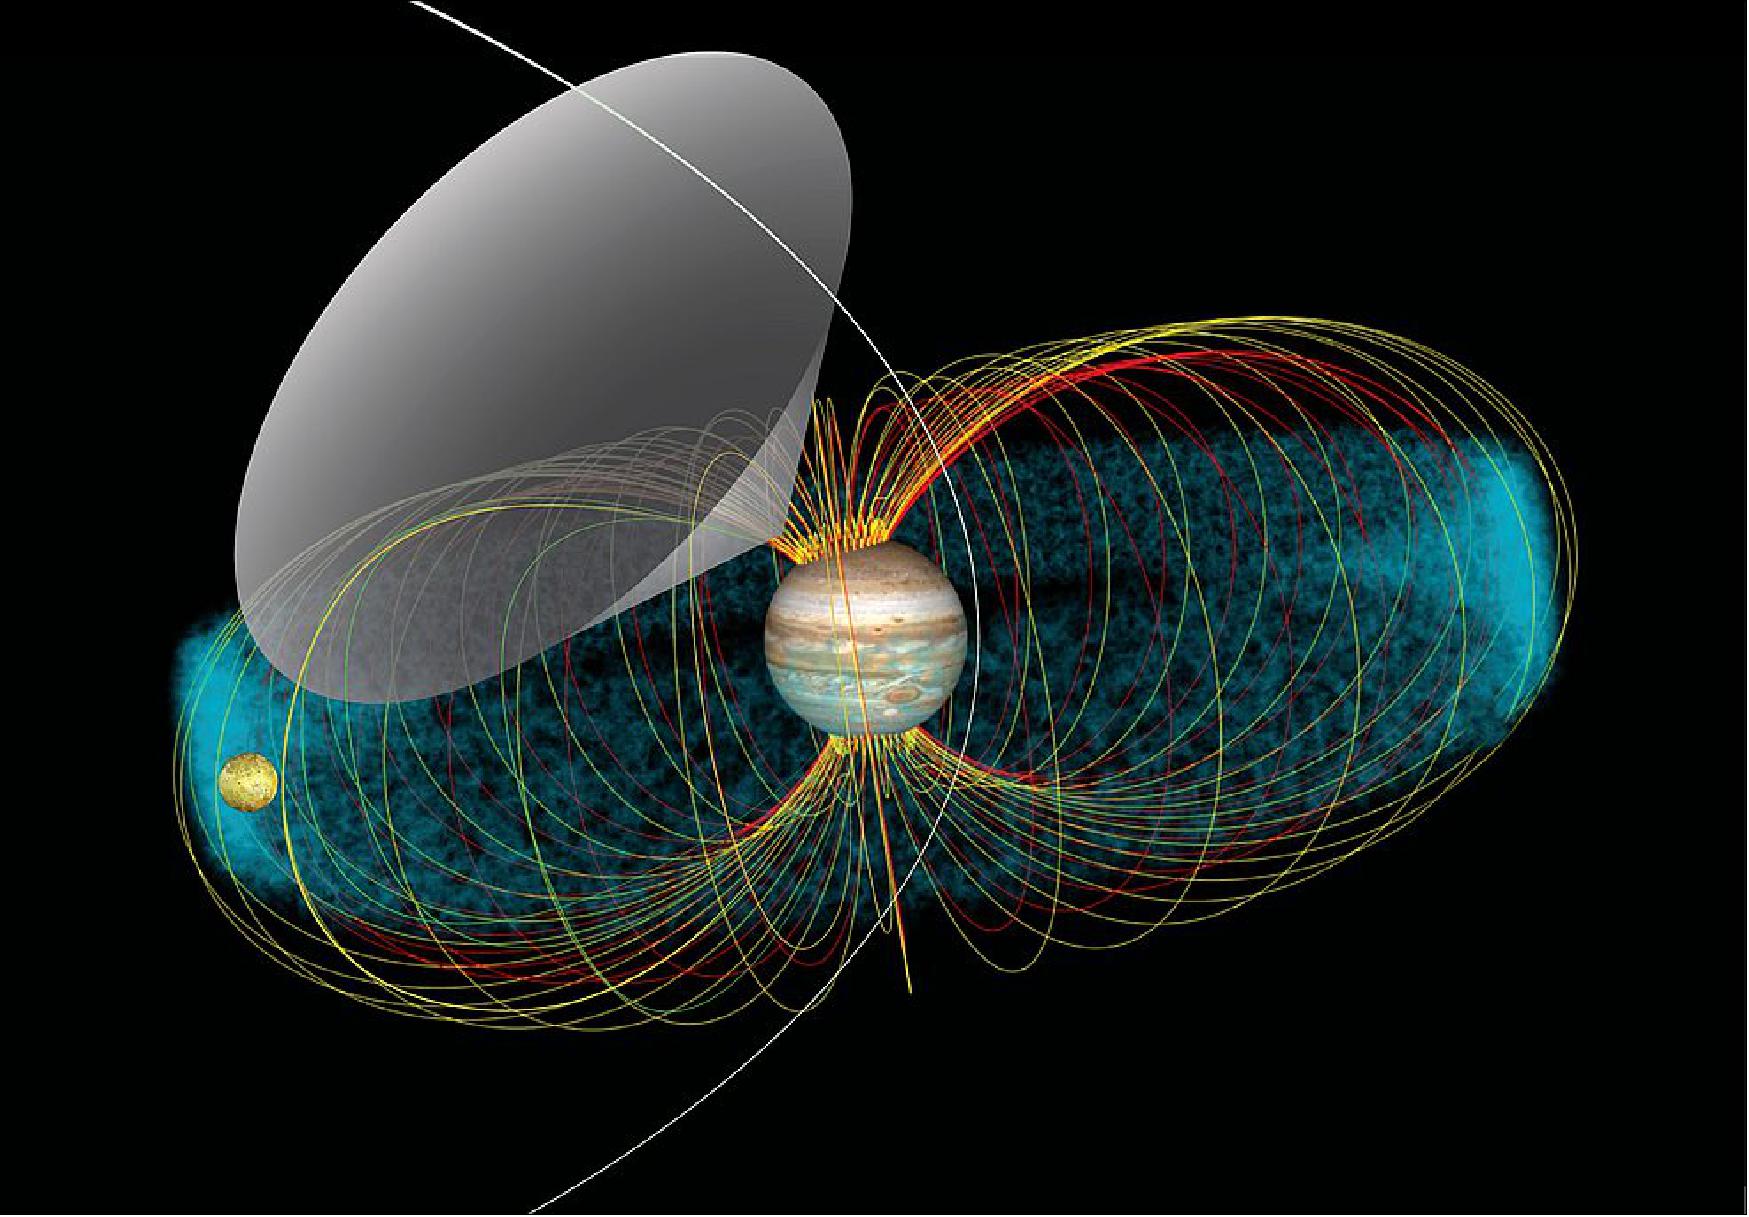 Figure 15: This is a representation of the Jupiter-Io system and interaction. The blue cloud is the Io plasma torus, which is a region of higher concentration of ions and electrons located at Io's orbit. This conceptual image shows the radio emission pattern from Jupiter. The multi-colored lines represent the magnetic field lines that link Io's orbit with Jupiter's atmosphere. The radio waves emerge from the source which is located at the line of force in the magnetic field and propagate along the walls of a hollow cone (grey area). Juno receives the signal only when Jupiter's rotation sweeps that cone over the spacecraft, in the same way a lighthouse beacon shines briefly upon a ship at sea. Juno's orbit is represented by the white line crossing the cone (image credit: NASA/GSFC, Jay Friedlander)